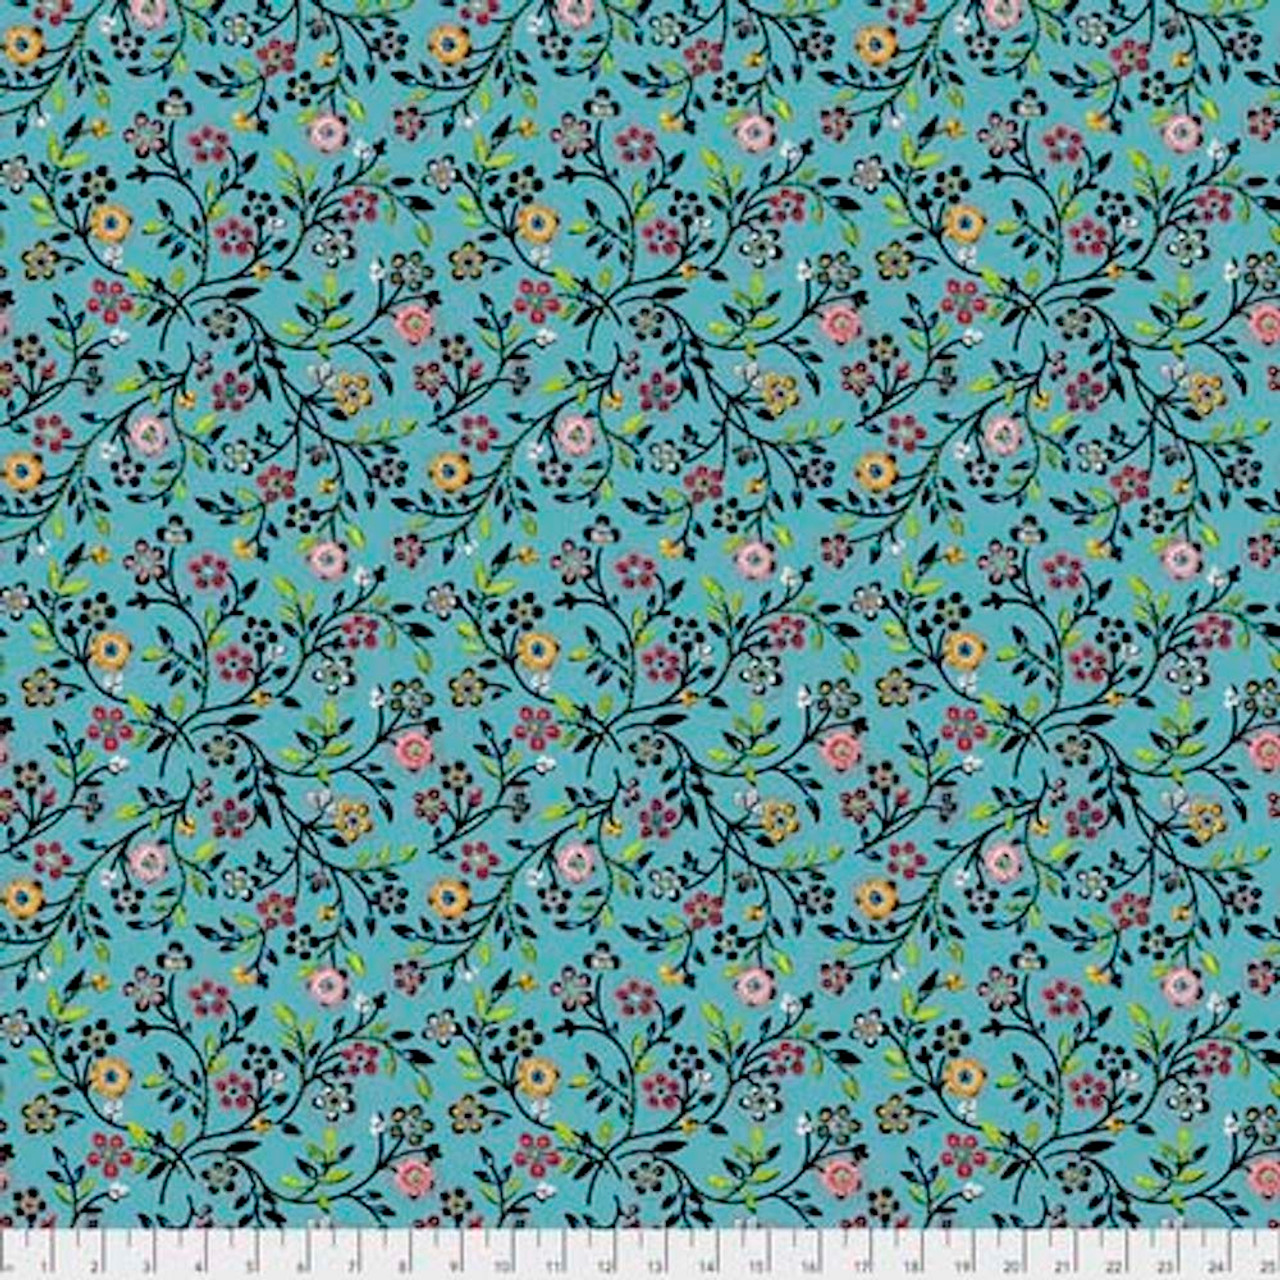 Odile Bailloeul PWOB007 Broderie Boheme Garden Of Delights Thunders Fabric By Yd